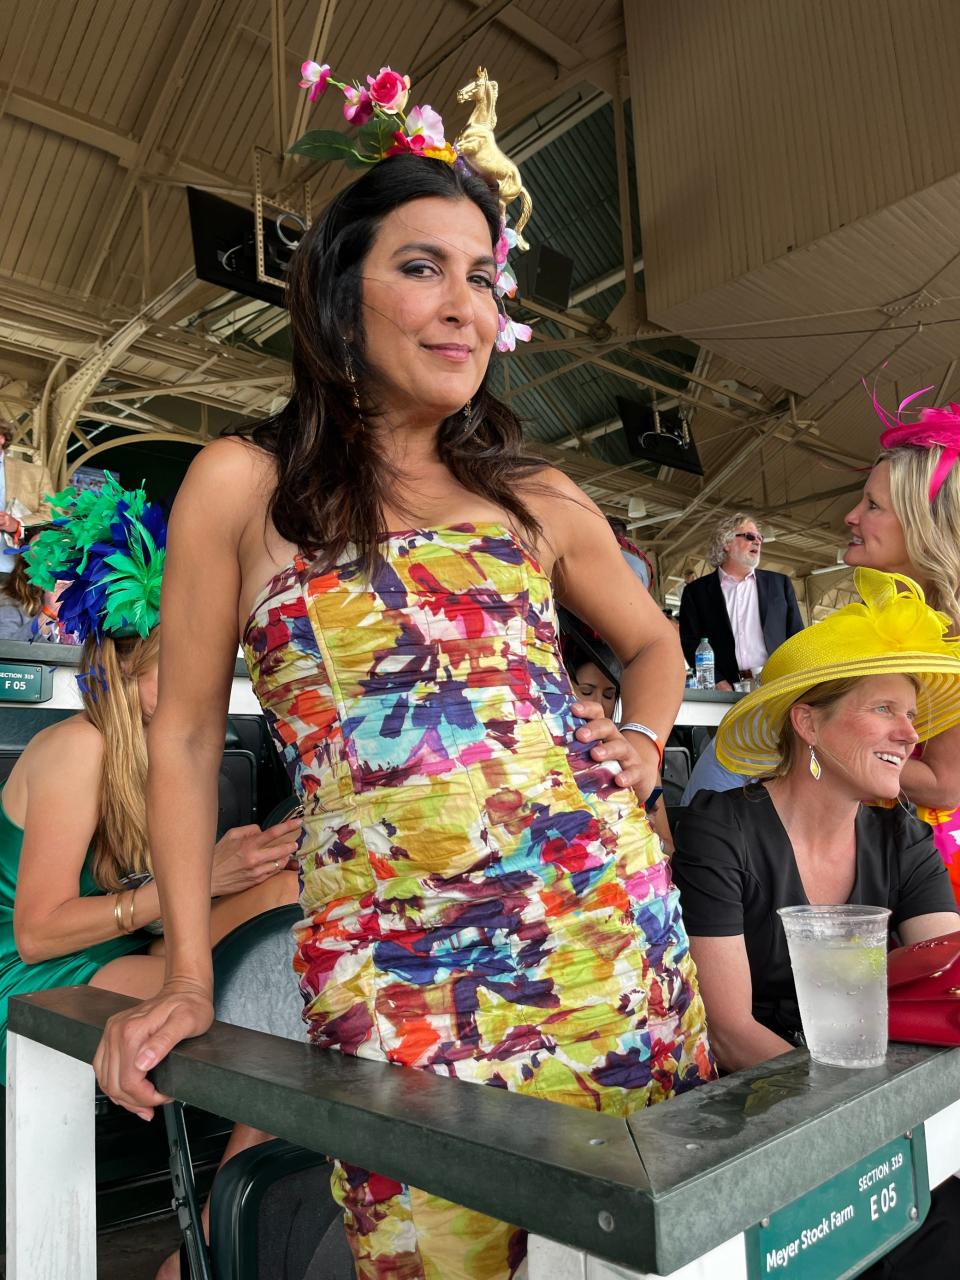 Salmeh Fodor, an attorney from Atlanta, is attending her eighth Derby with her friends.